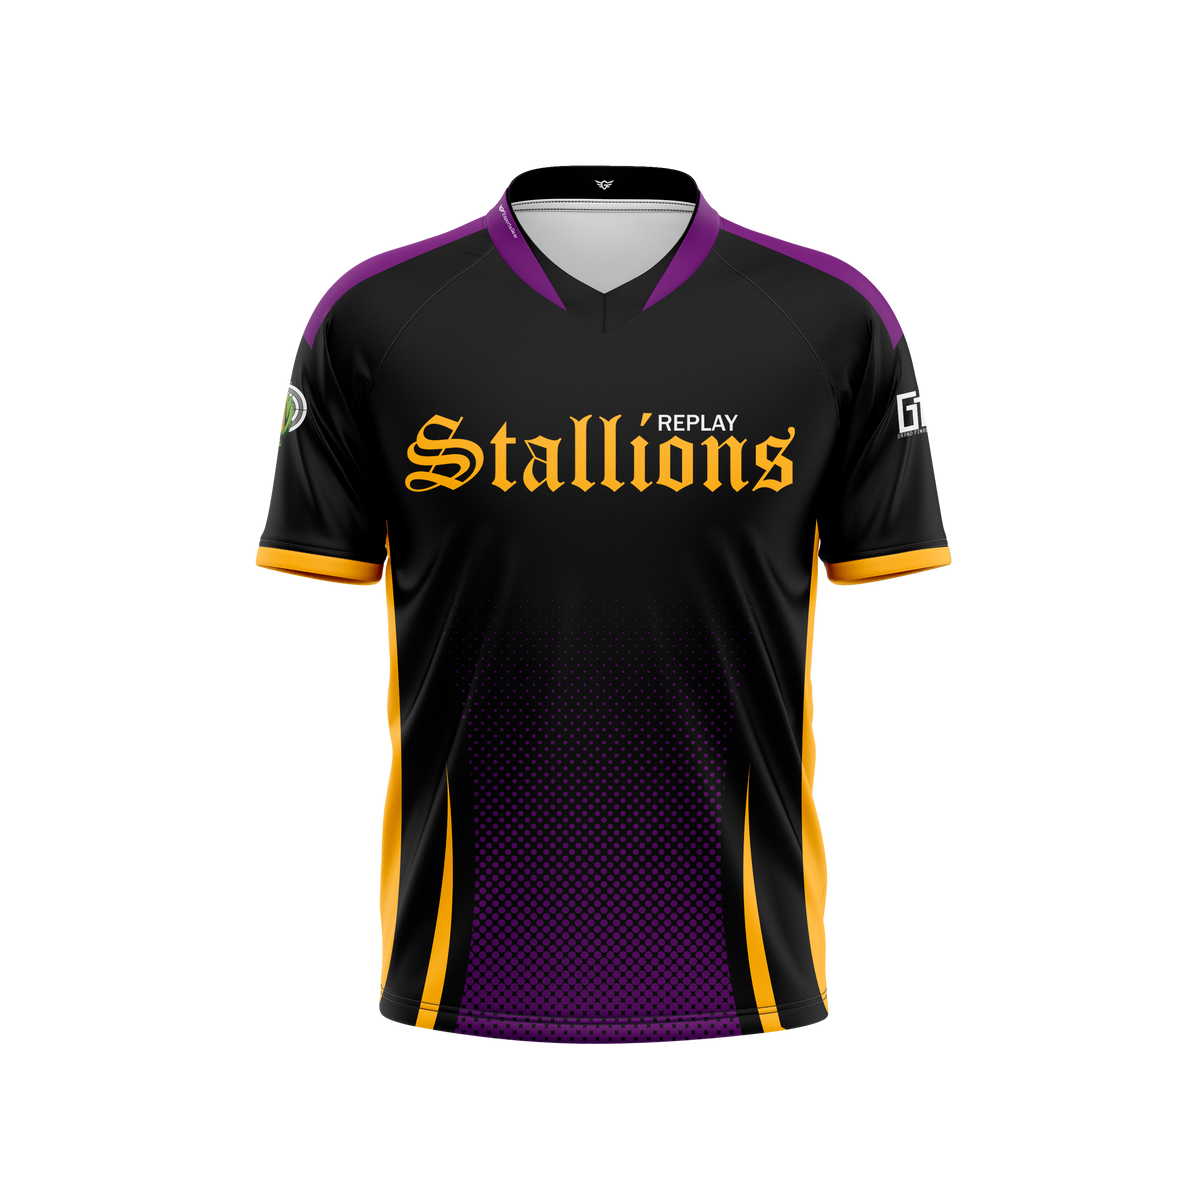 Replay Stallions FGC Jersey Spring 2022 Jersey